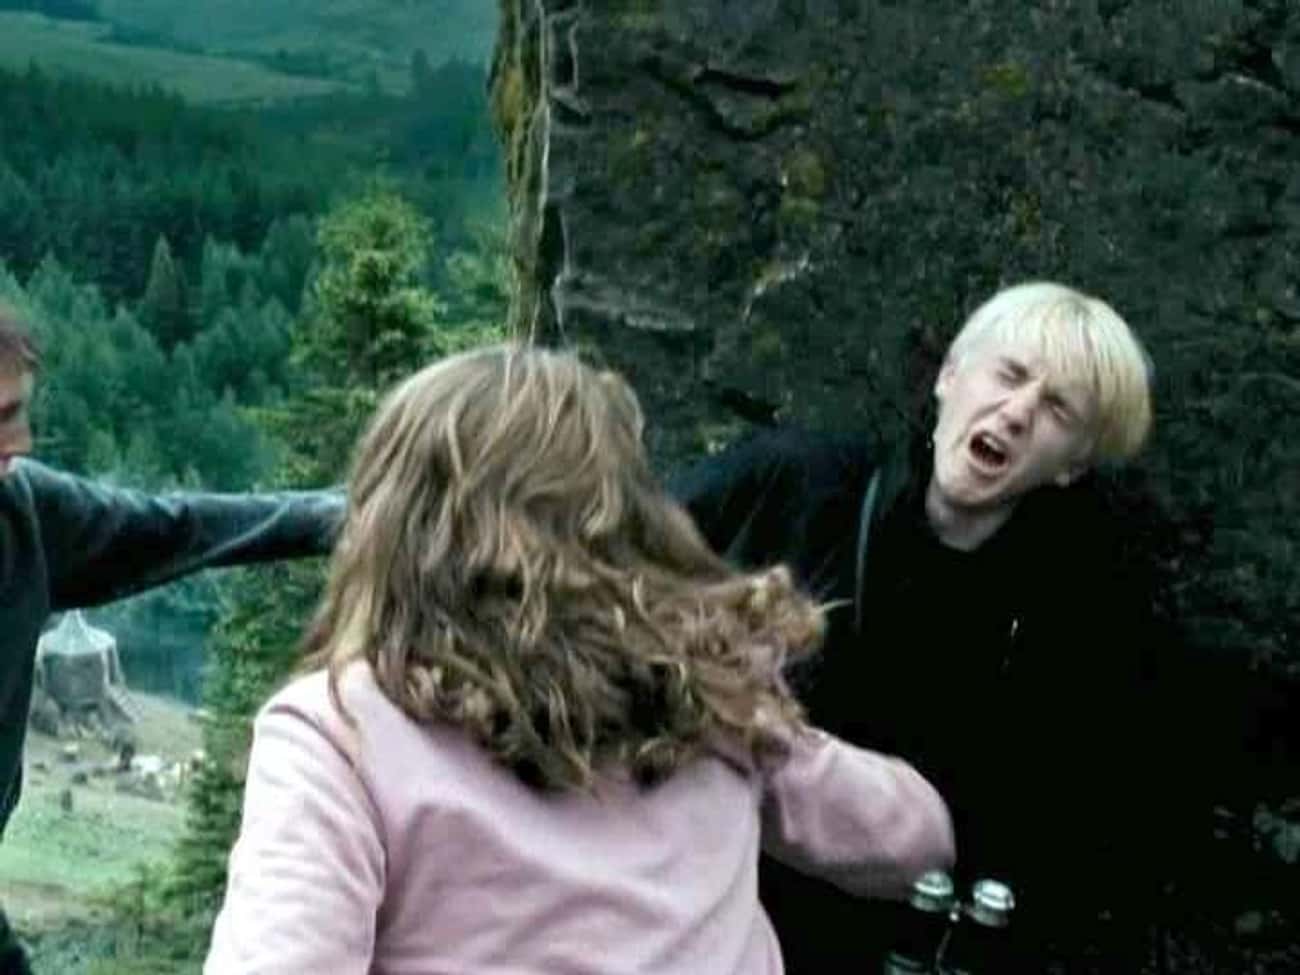 Hermione Punches Draco, 'Harry Potter and the Prisoner of Azkaban'